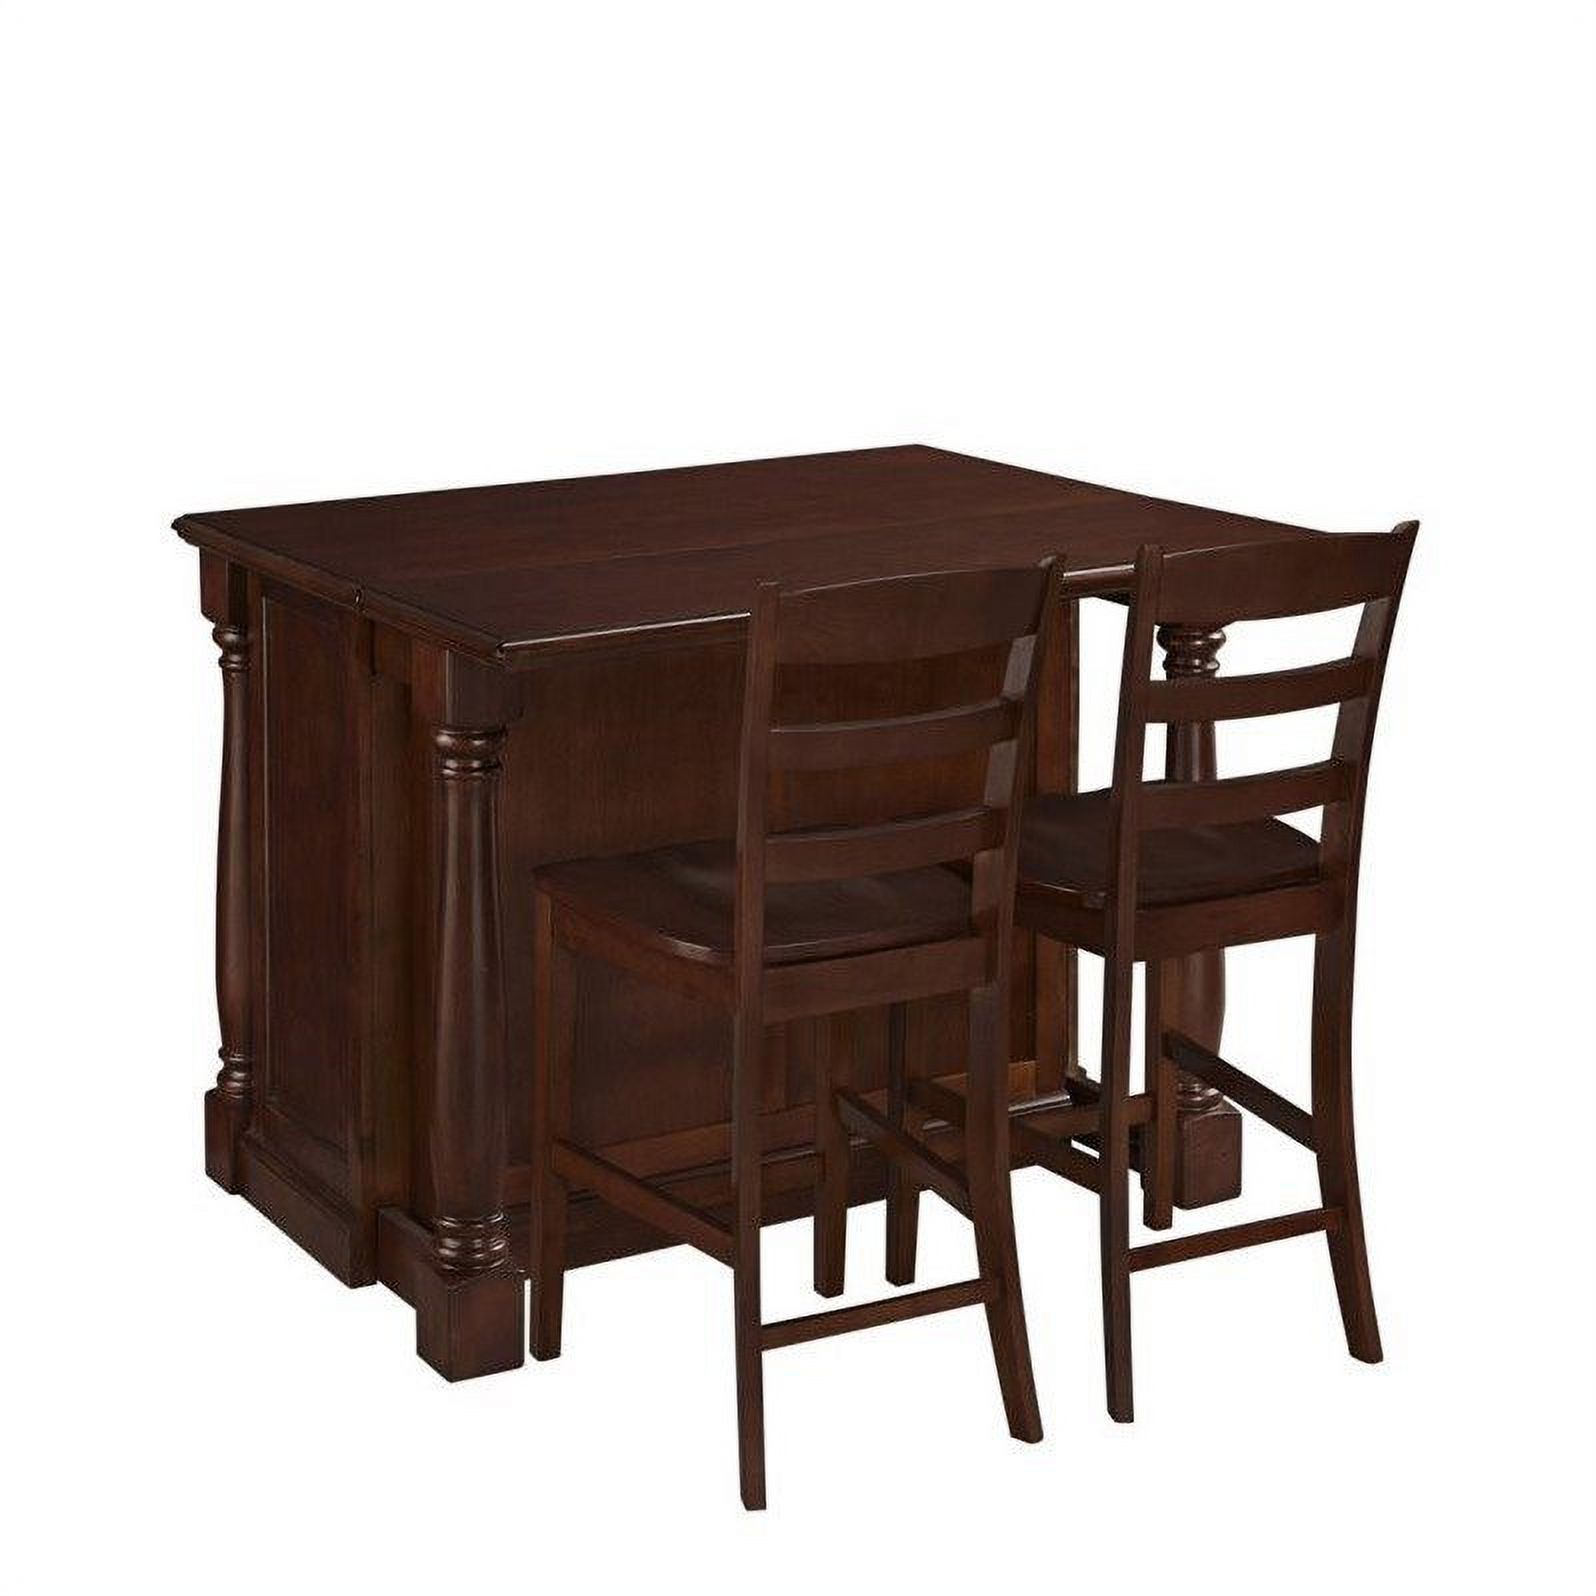 Kitchen Island with Two Stools in Cherry Finish - image 2 of 2